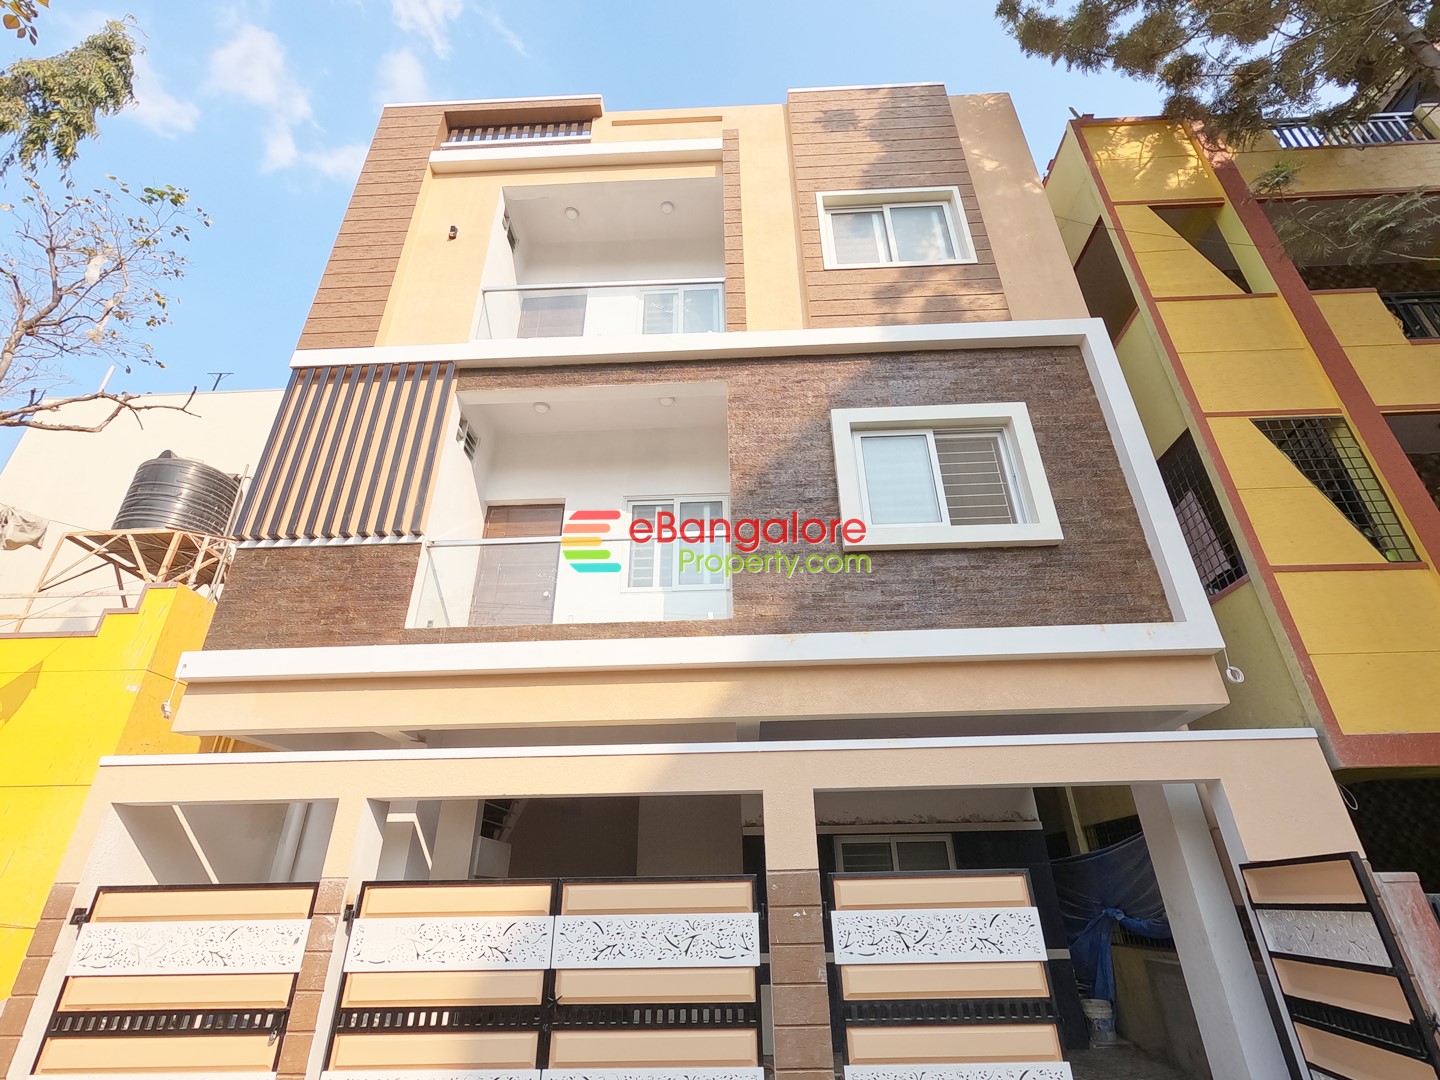 Thanisandra Road – 3BHK+3BHK+2BHK 3 Unit Building For Sale on 30×45 – Semifurnished